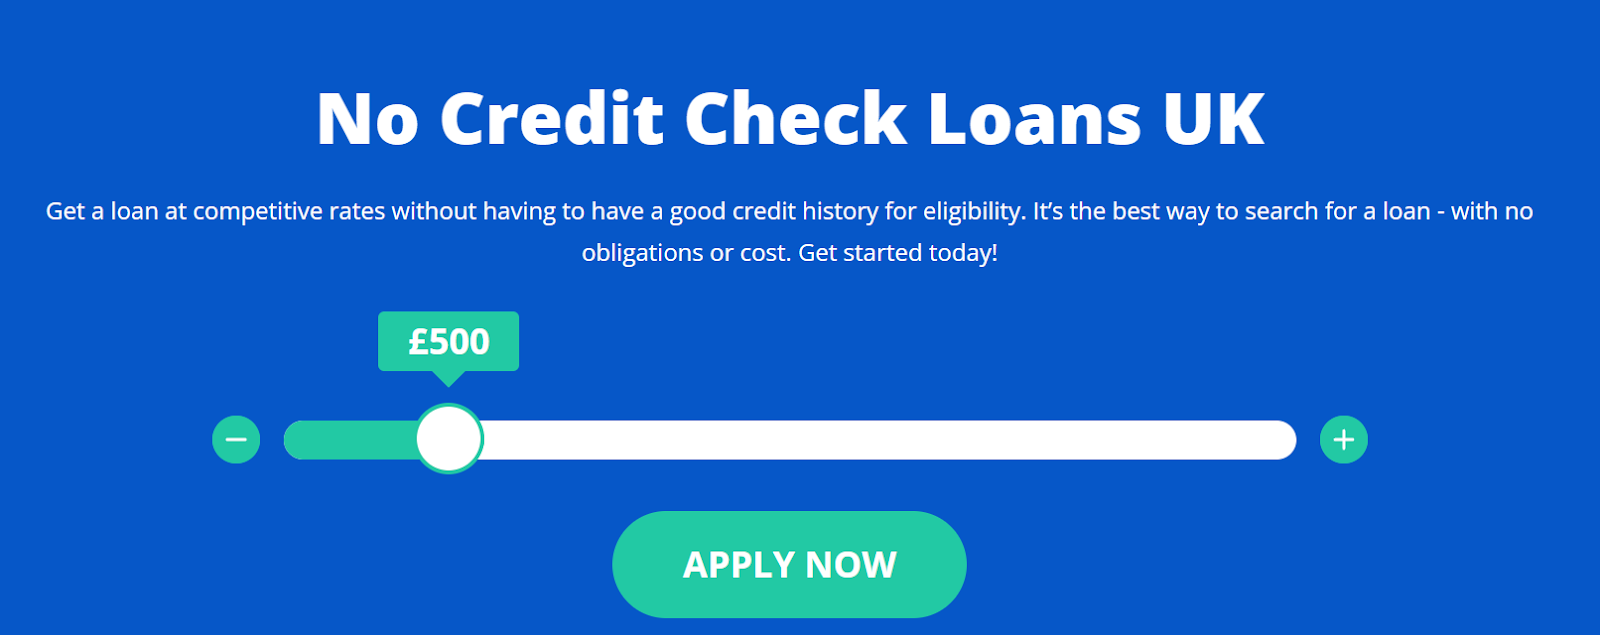 Tips to Apply for No Credit Check Loans in UK